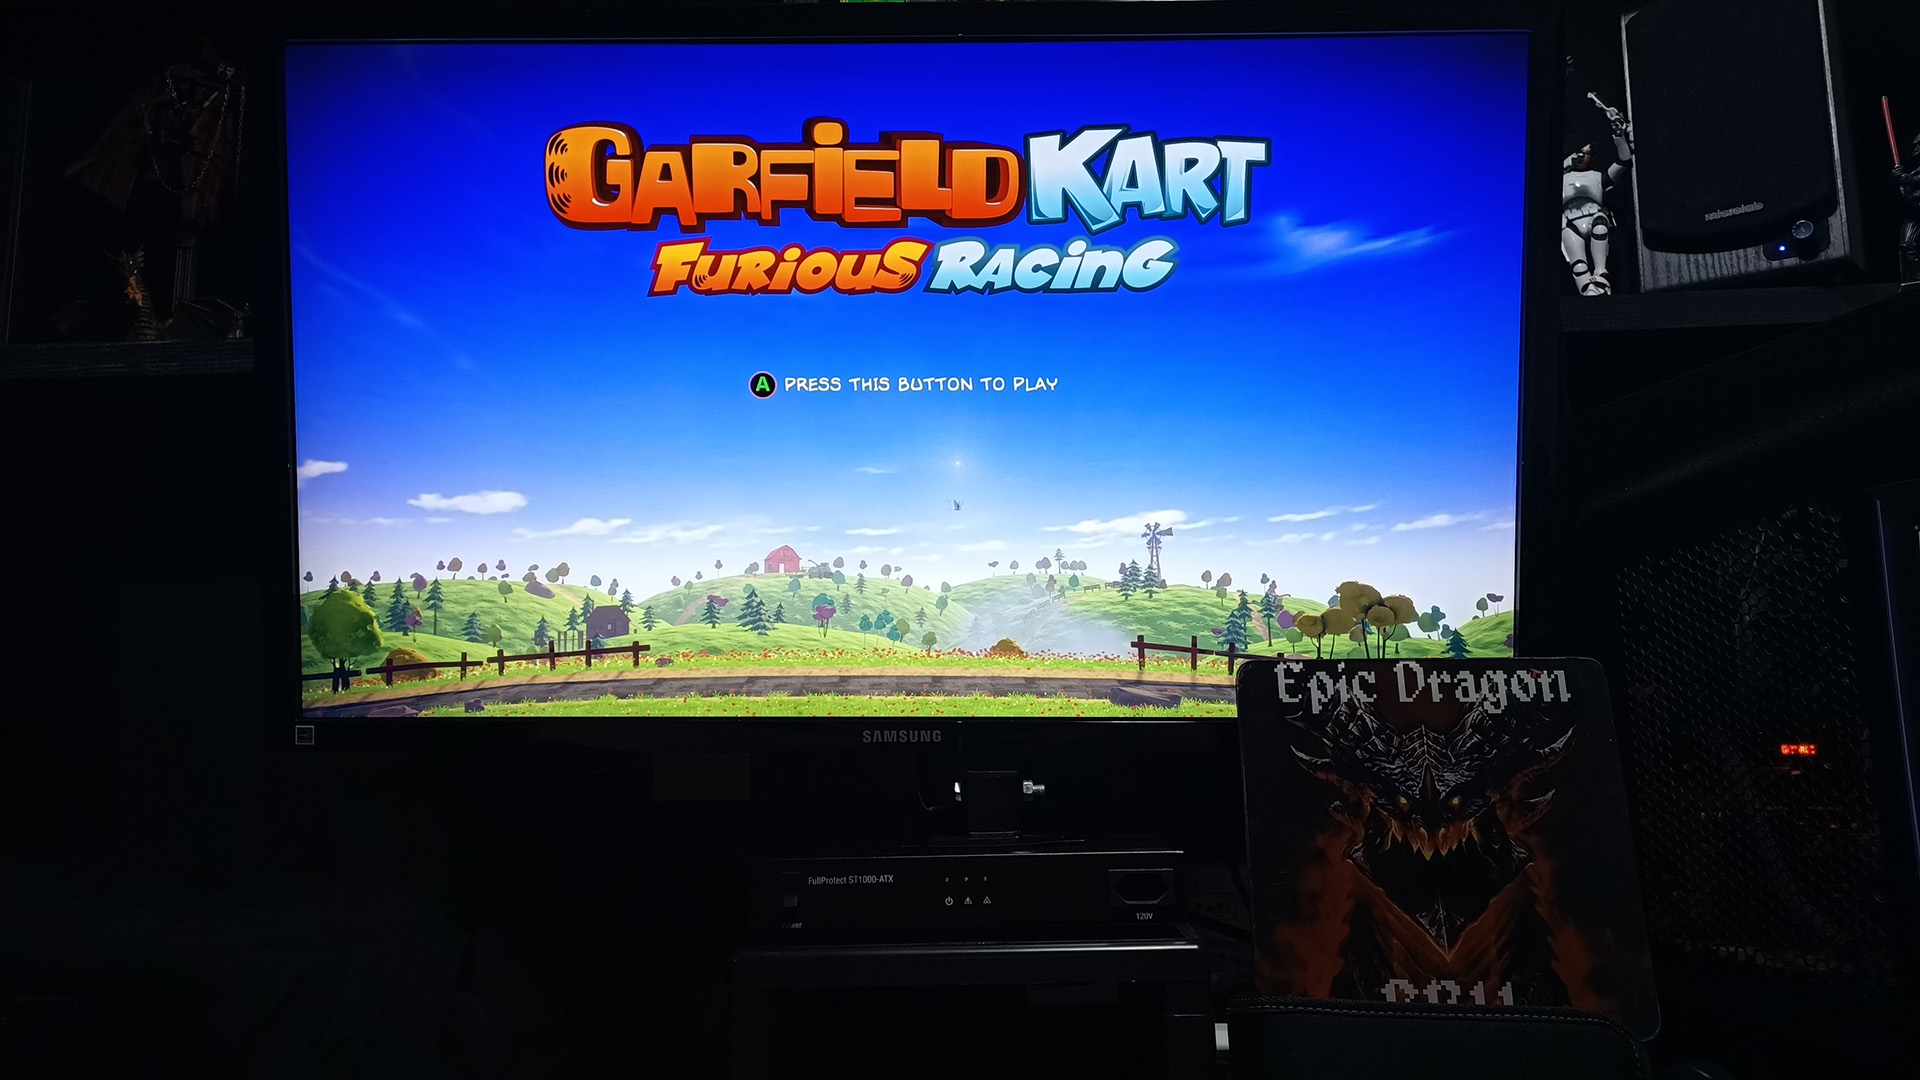 Garfield Kart Furious Racing: Prohibited Site [Time Trial: Lap Time] time of 0:00:55.685